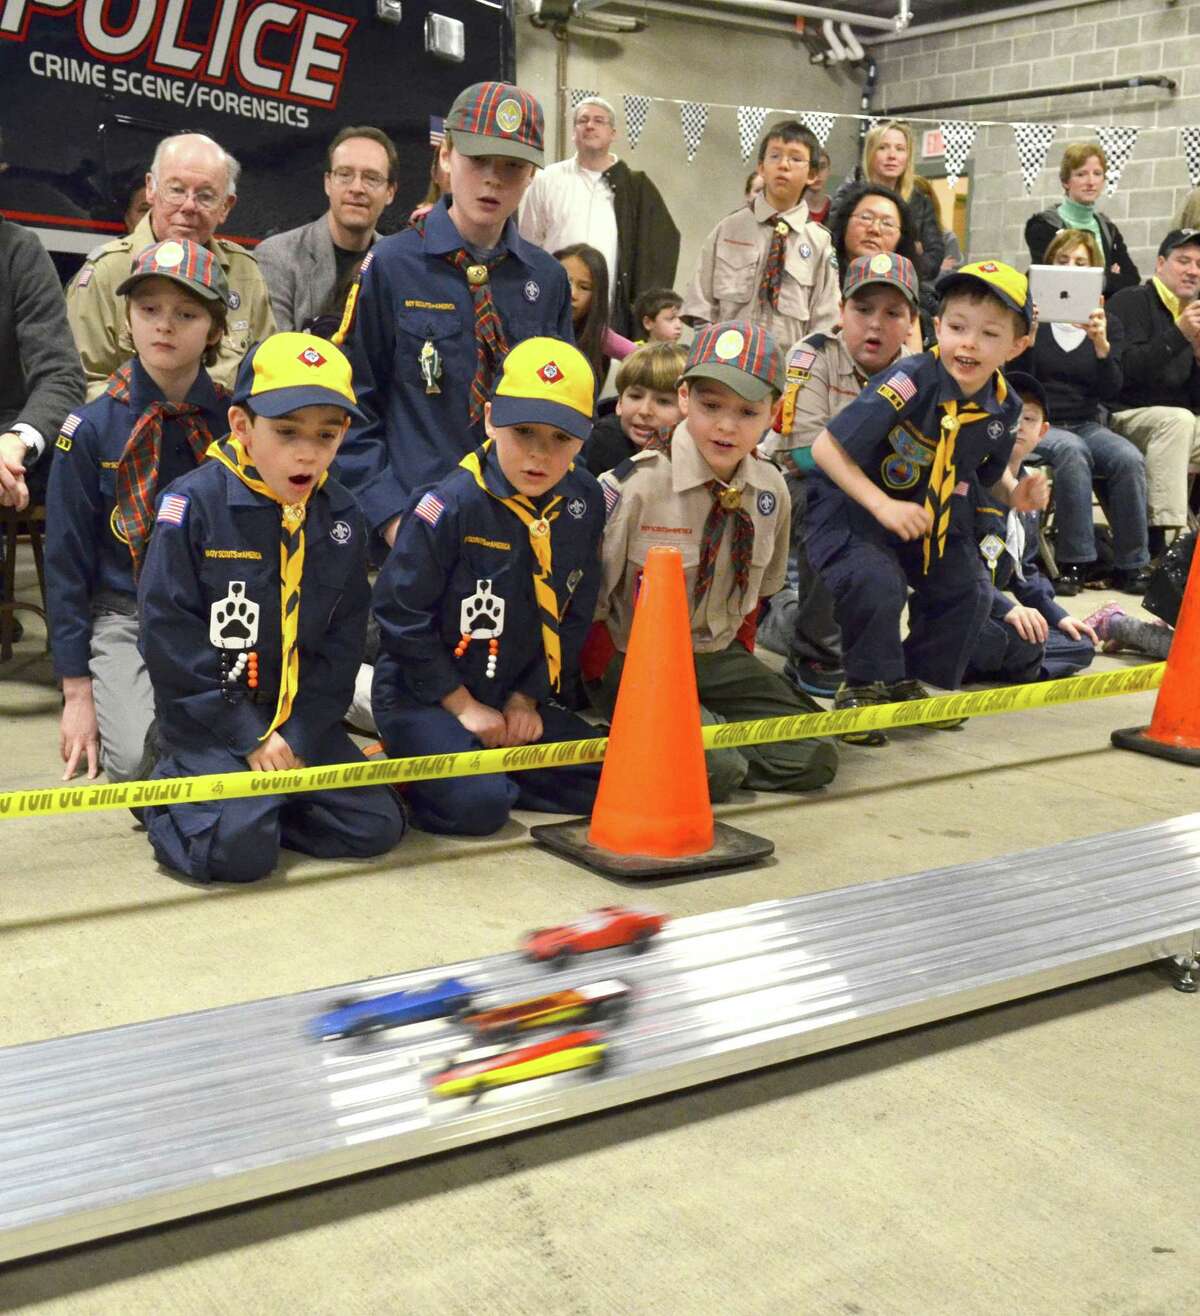 A day at the races Local scouts take part in annual Pinewood Derby